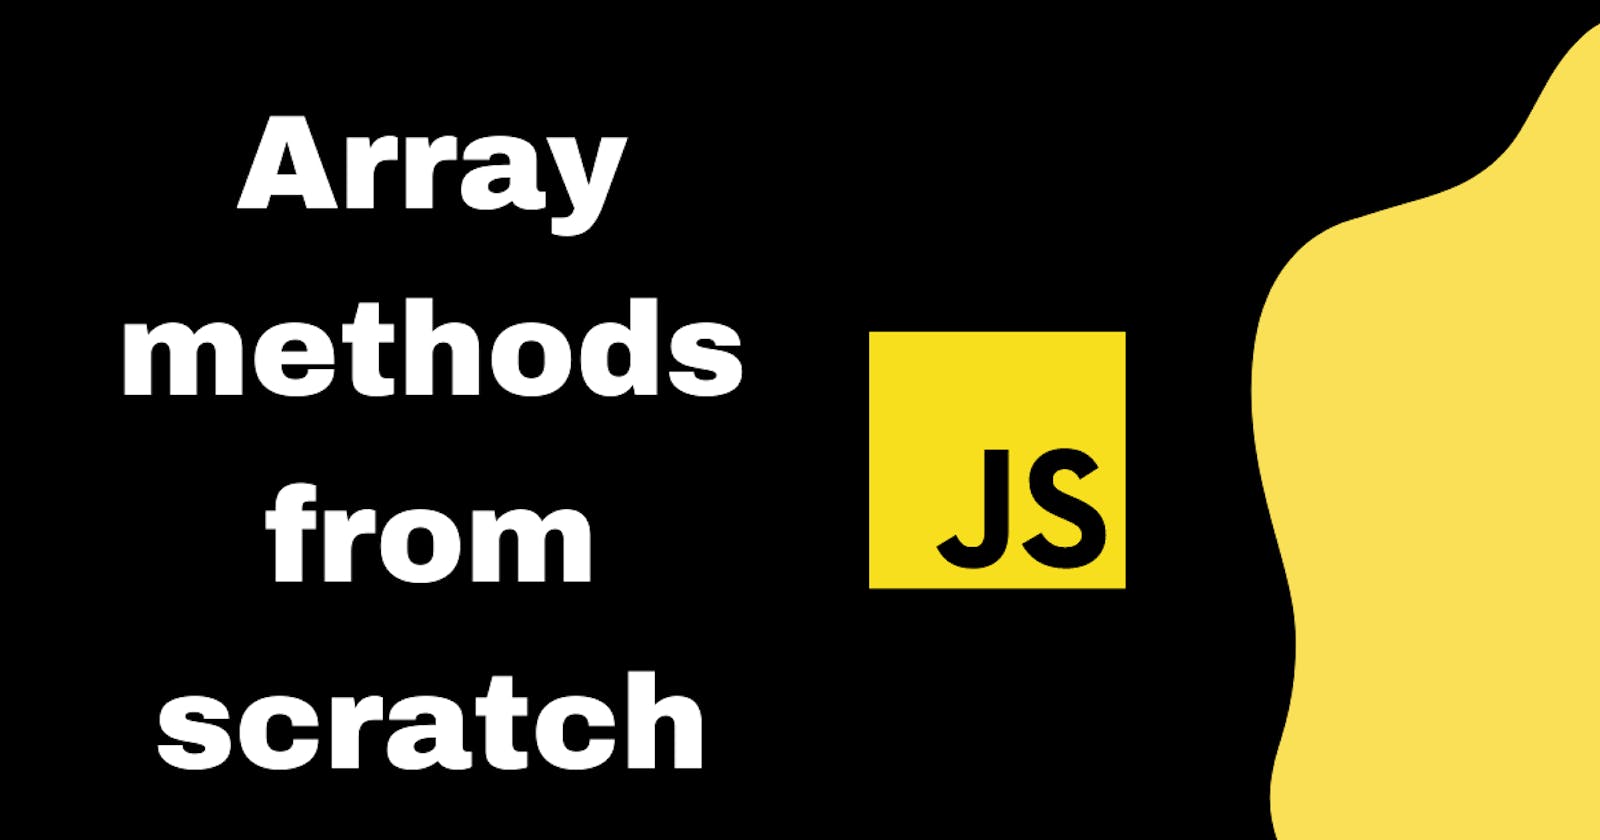 Understand JavaScript better: Implementing array methods from scratch